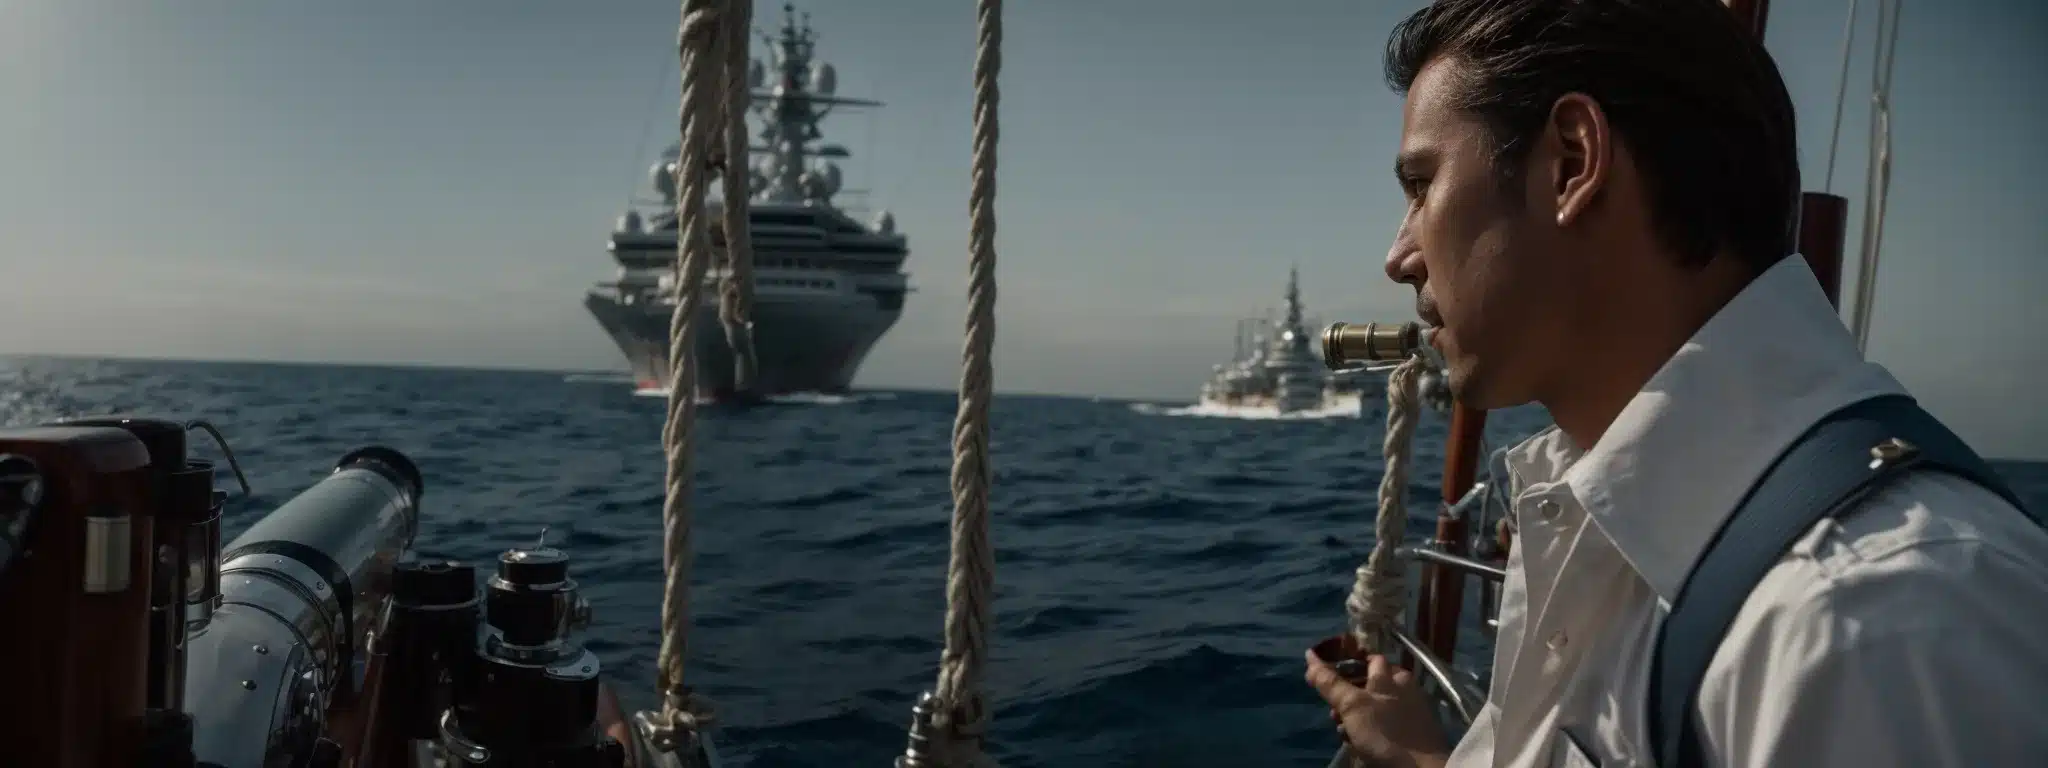 A Captain Gazes Through A Ship'S Periscope, Surveying Other Ships Sailing On The Vast Ocean.